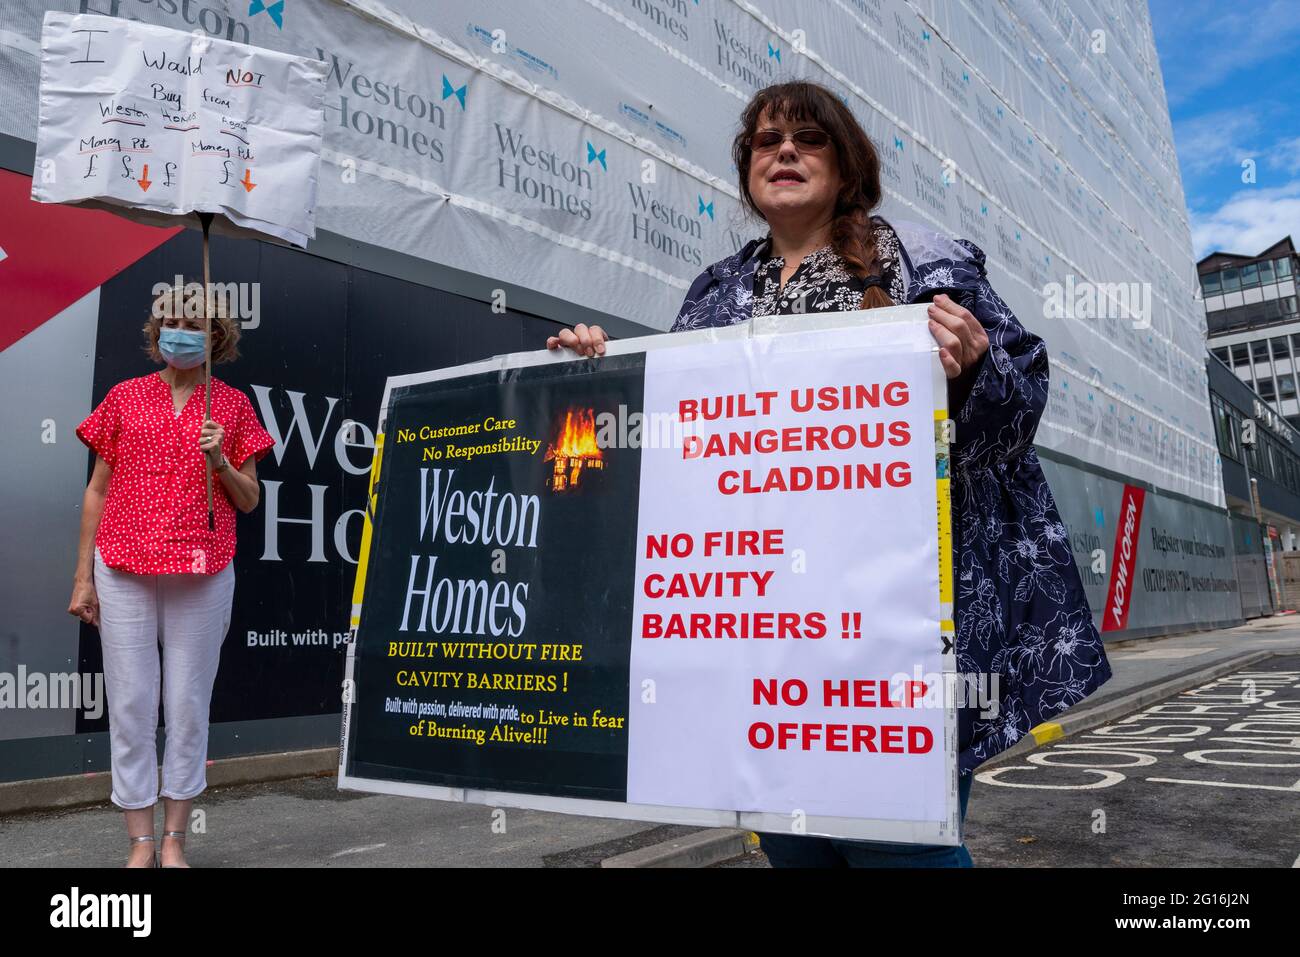 Southend on Sea, Essex, UK. 5th Jun, 2021. A National Day of Developer Protest is taking place outside a Weston Homes show home site by protesters who believe that such developers should be responsible for correcting high rise fire safety issues in the buildings in which they live. The Grenfell Inquiry has resulted in £5bn being made available by government for the replacement of cladding, but it has been estimated that a figure of £15bn would be required to correct all fire safety issues, a shortfall which has fallen onto residents to pay themselves Stock Photo